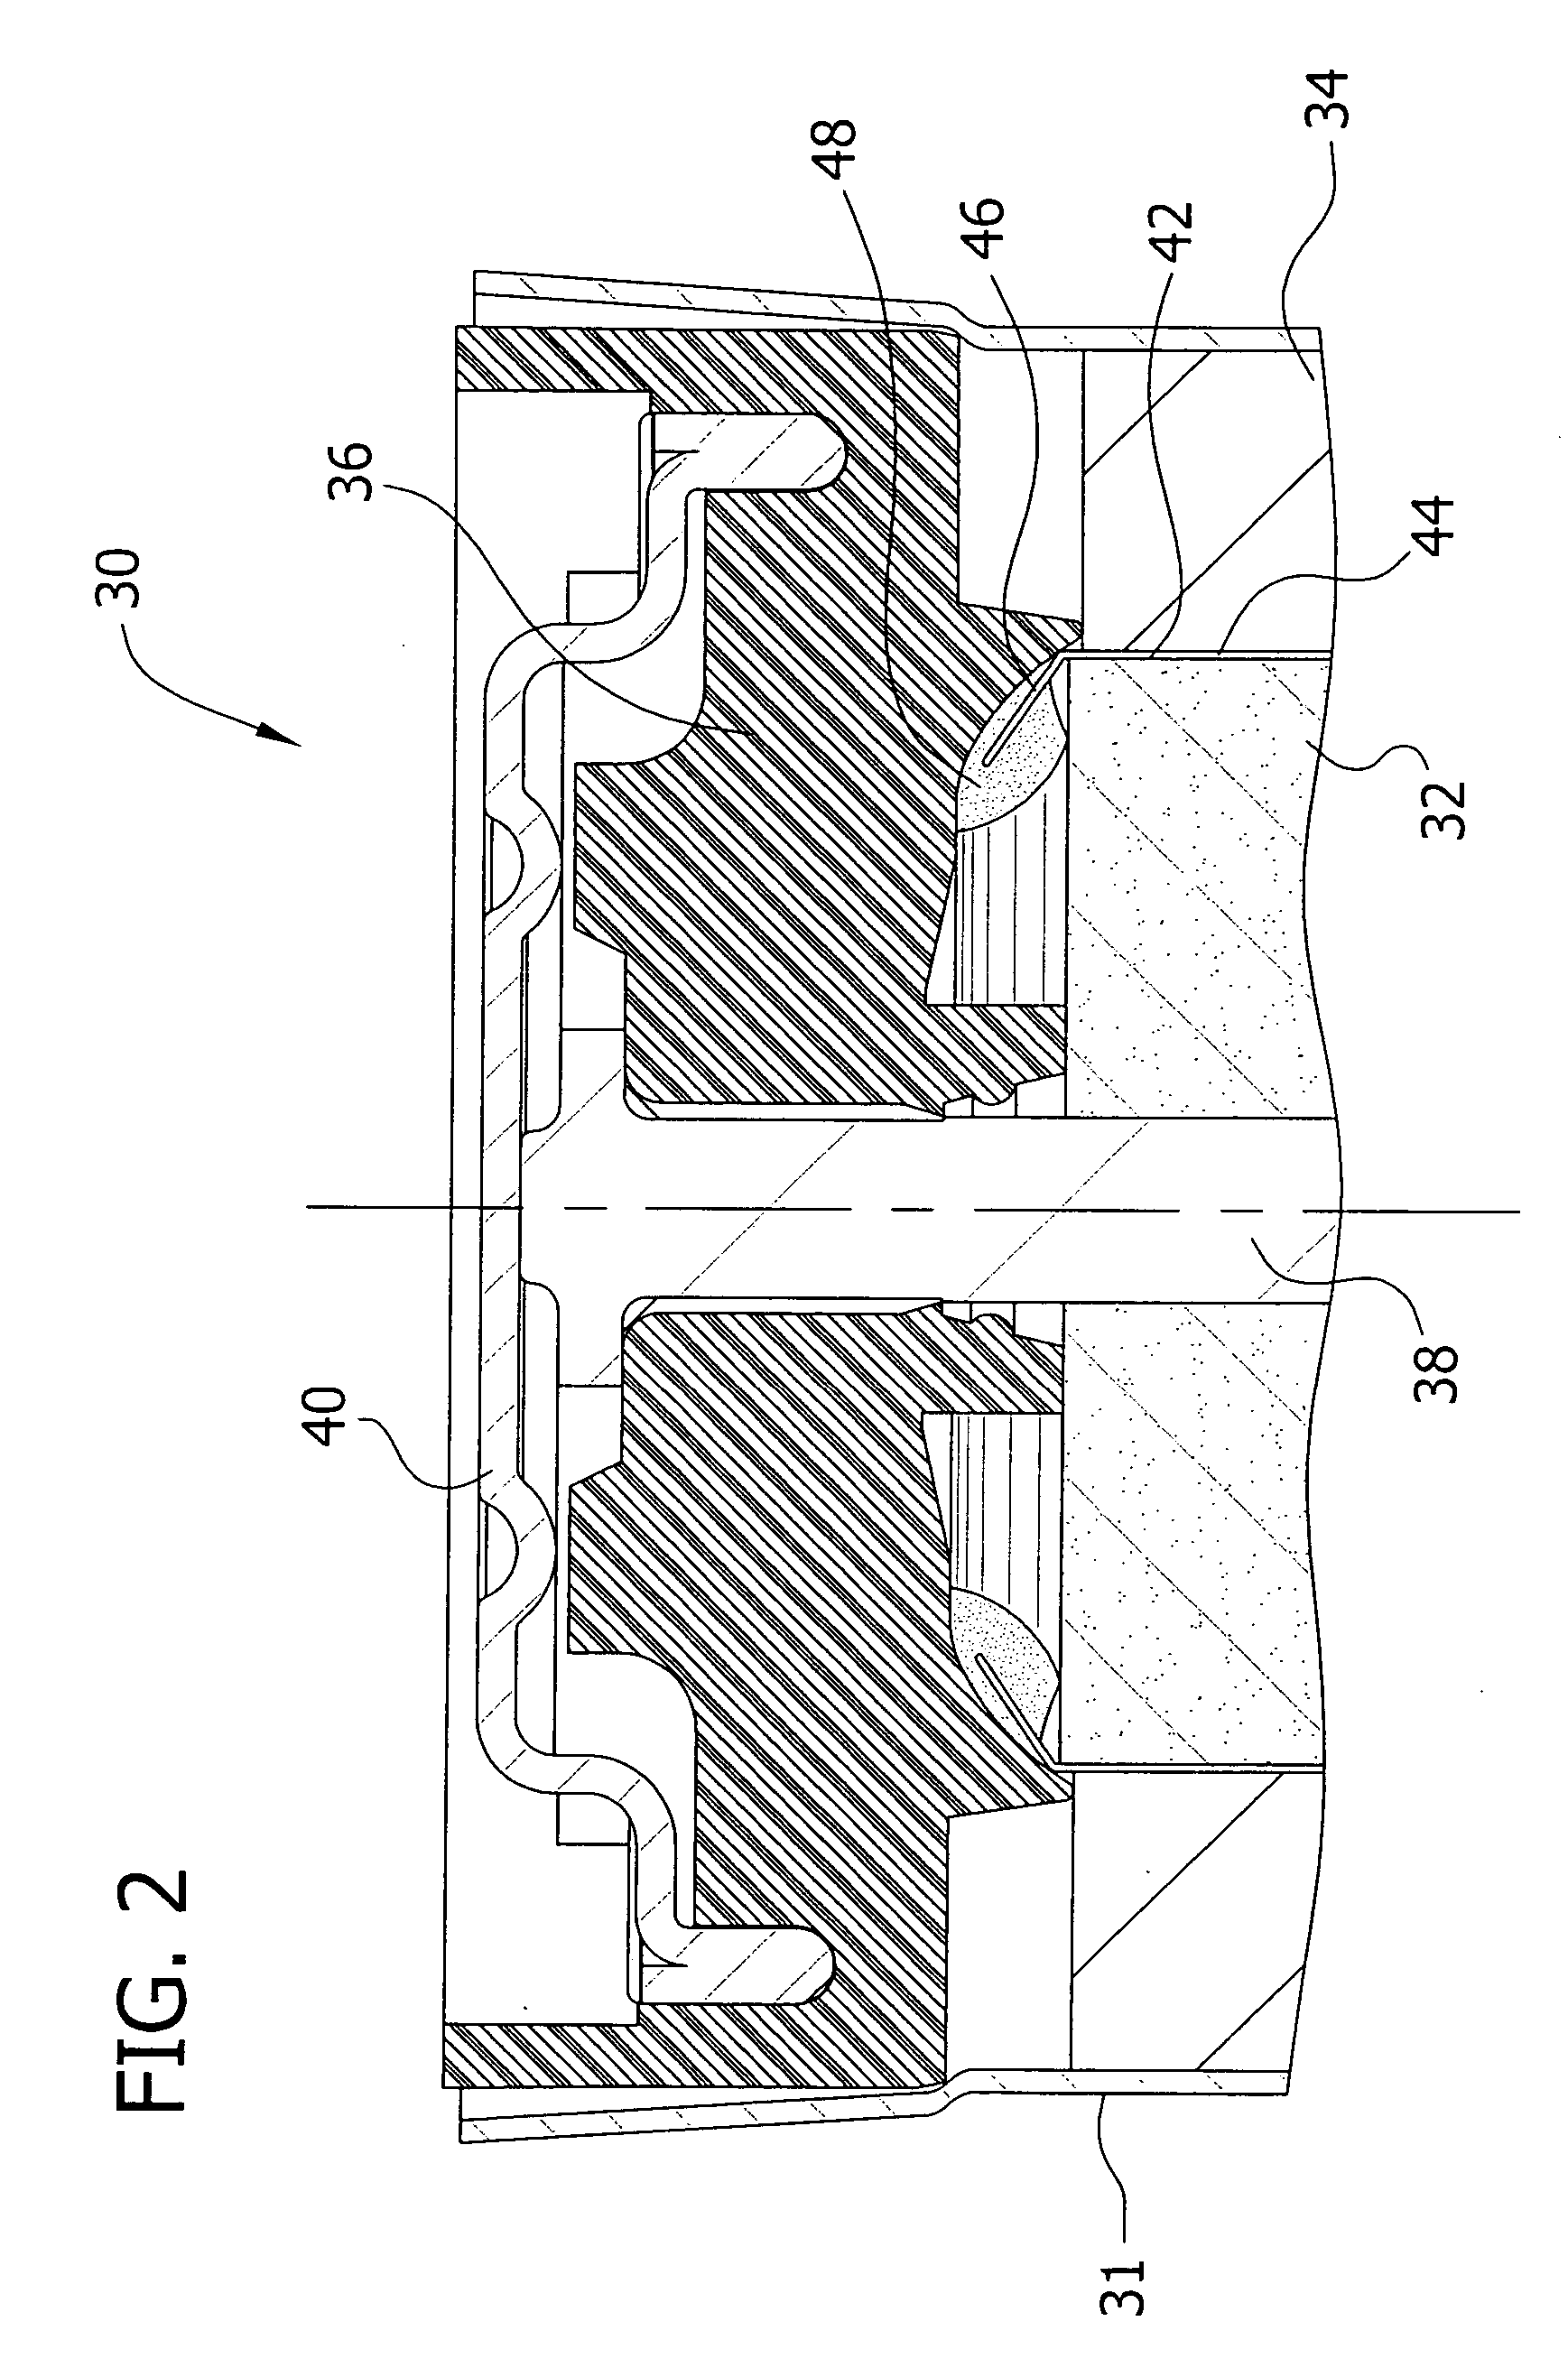 Adhesive for use in an electrochemical cell